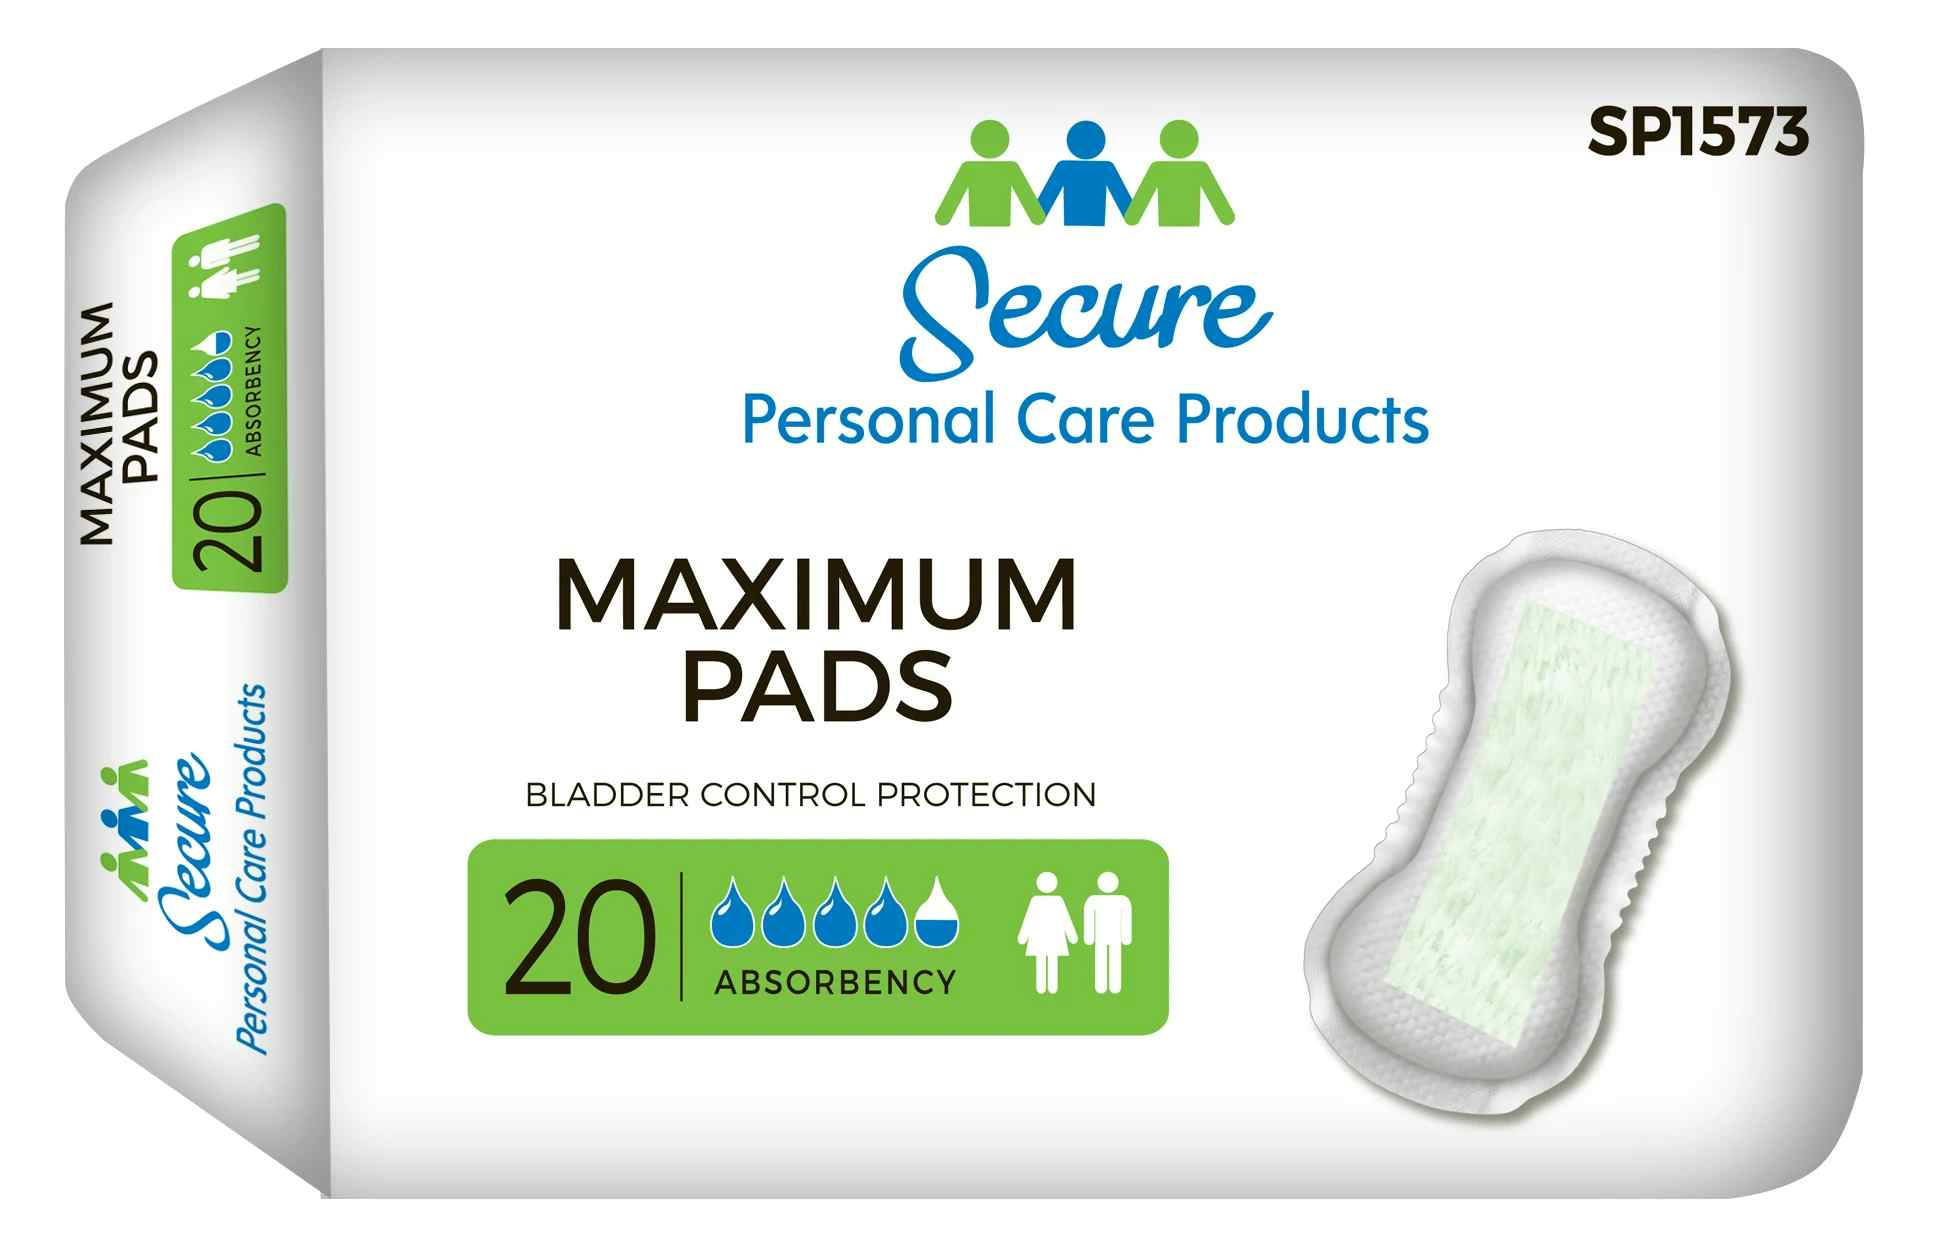 Secure Personal Care Products Maximum Bladder Control Pads, SP1573, Case of 180 (9 Bags)